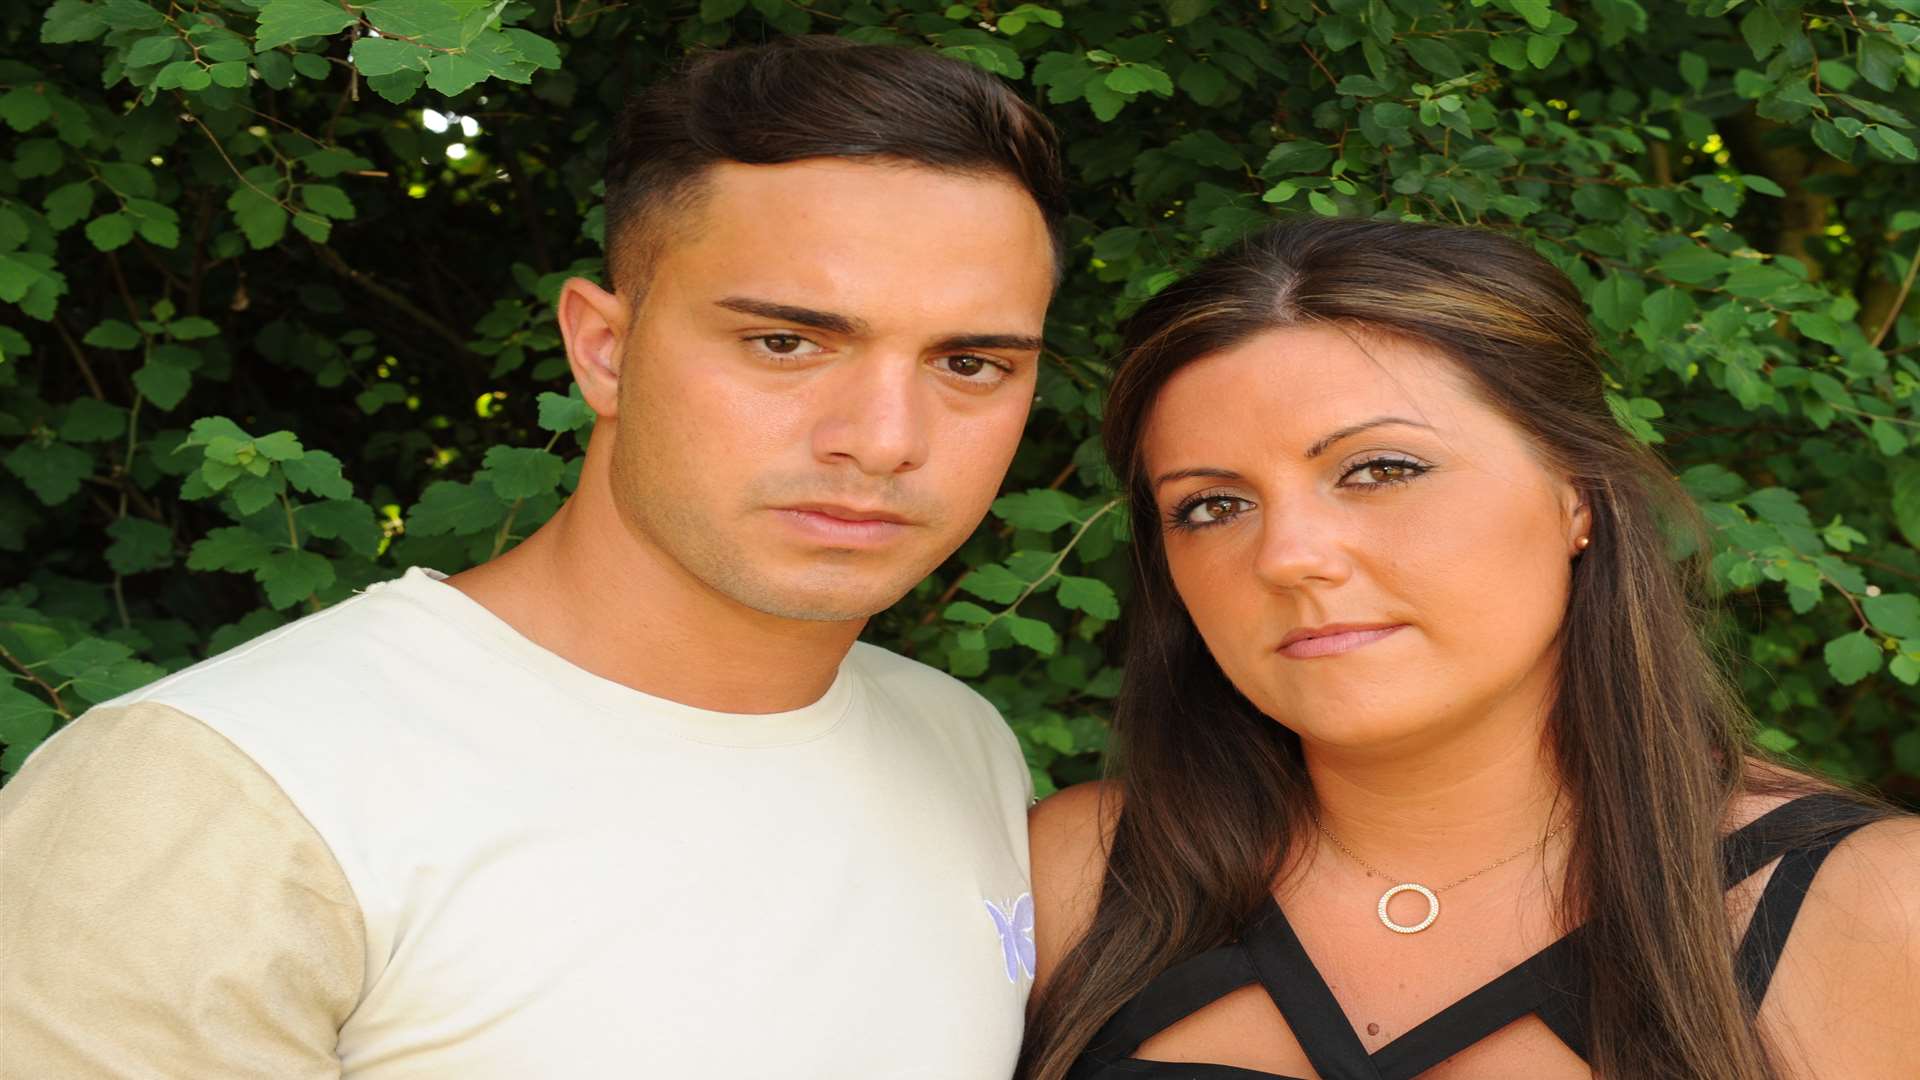 Danielle and Kai Kemal. The couple lost over £4000 in a scam. Picture: Steve Crispe